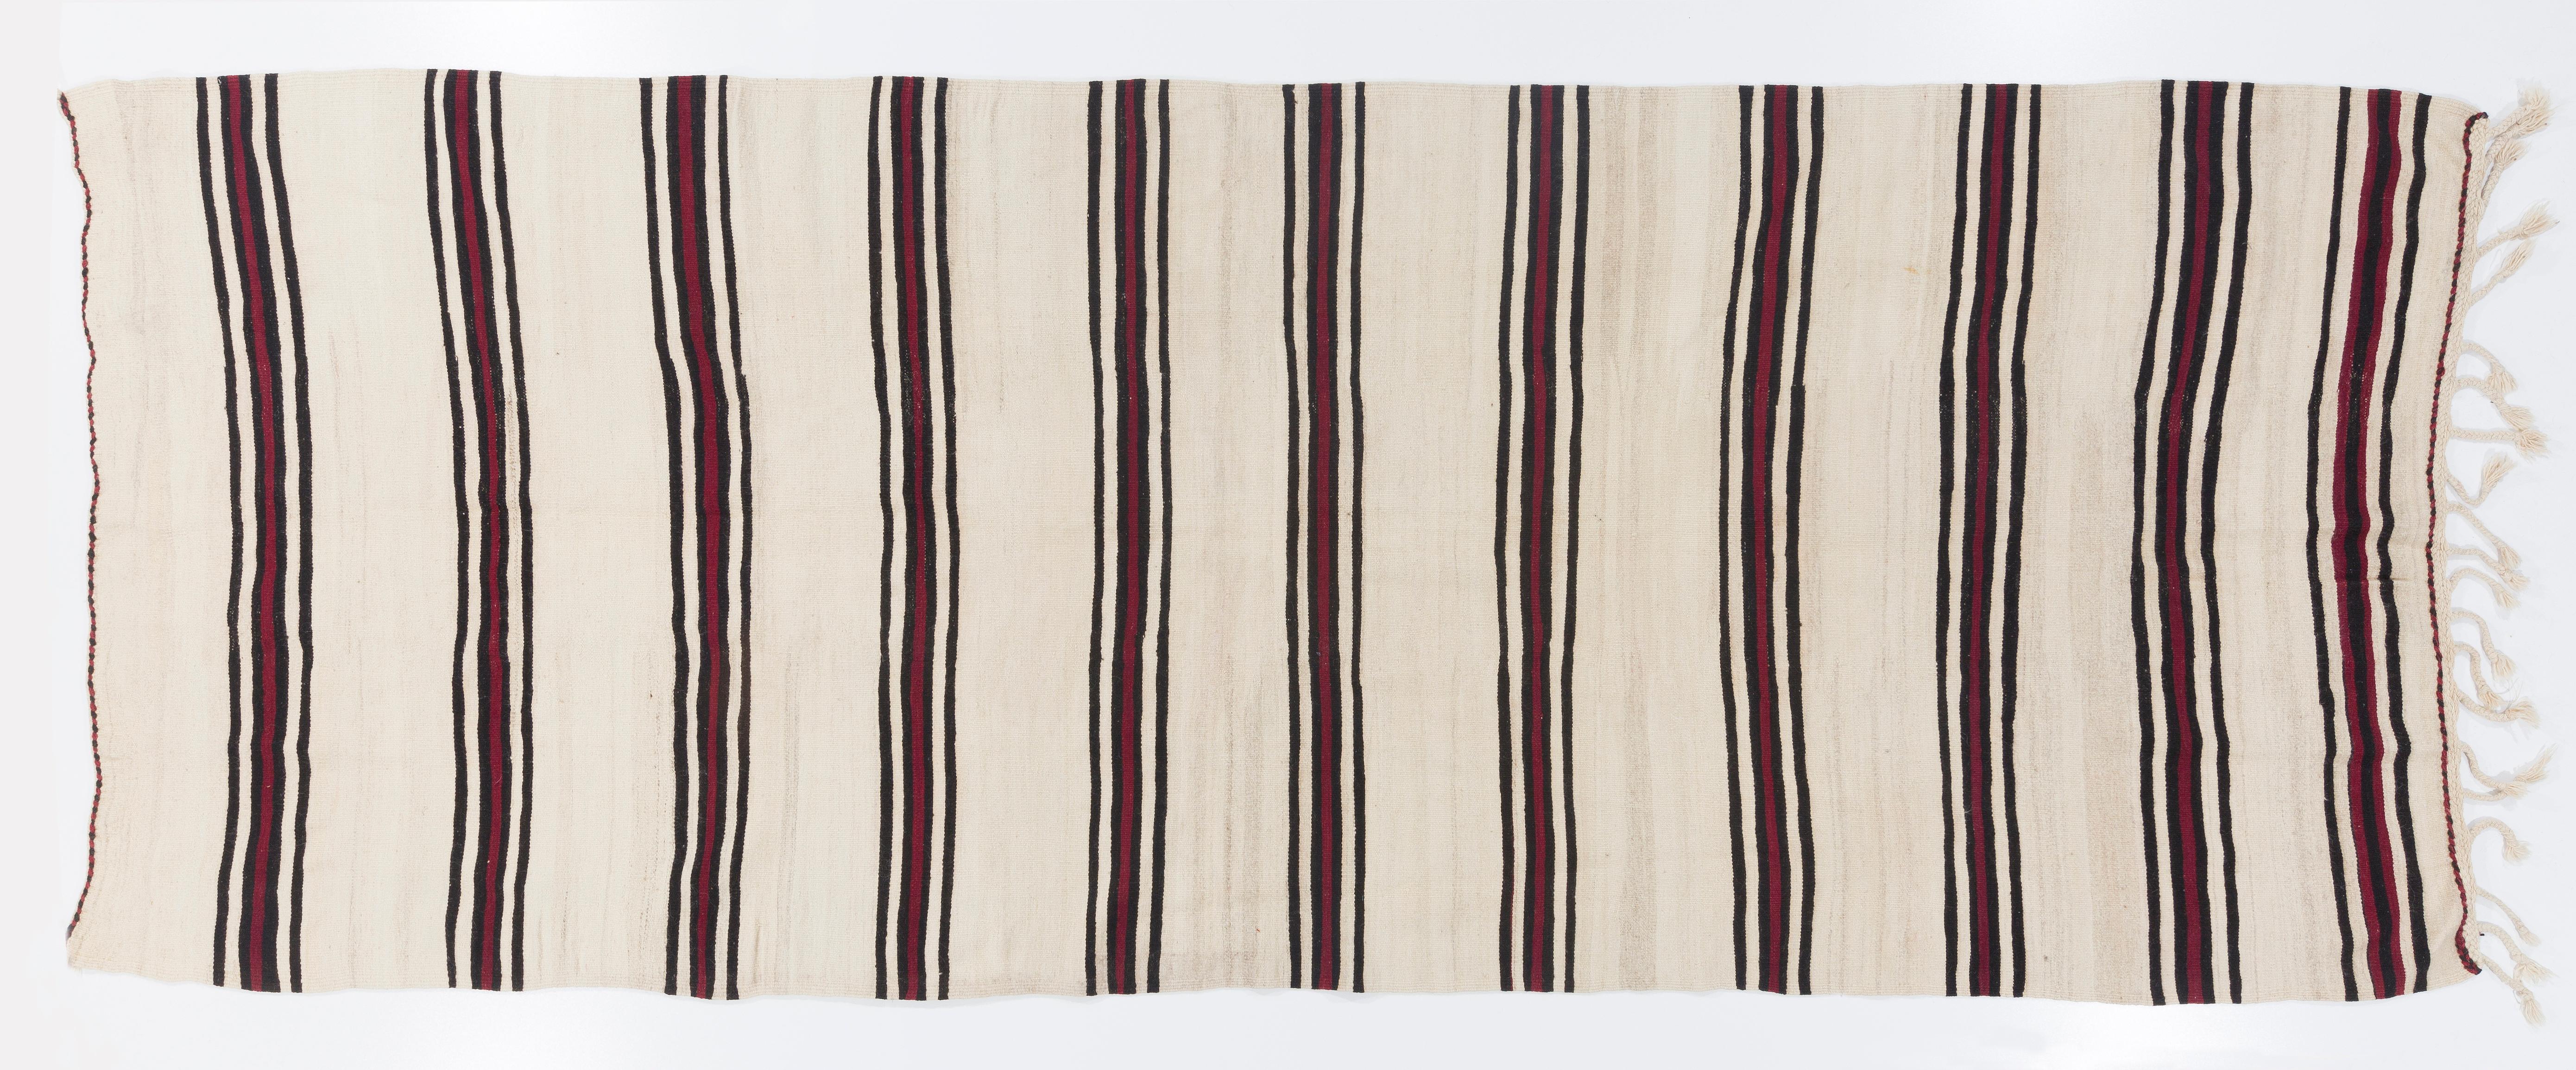 20th Century 5x13.7 Ft Hand-Woven Kilim Runner, 100% Natural Wool, Striped Flat-Weave Rug For Sale